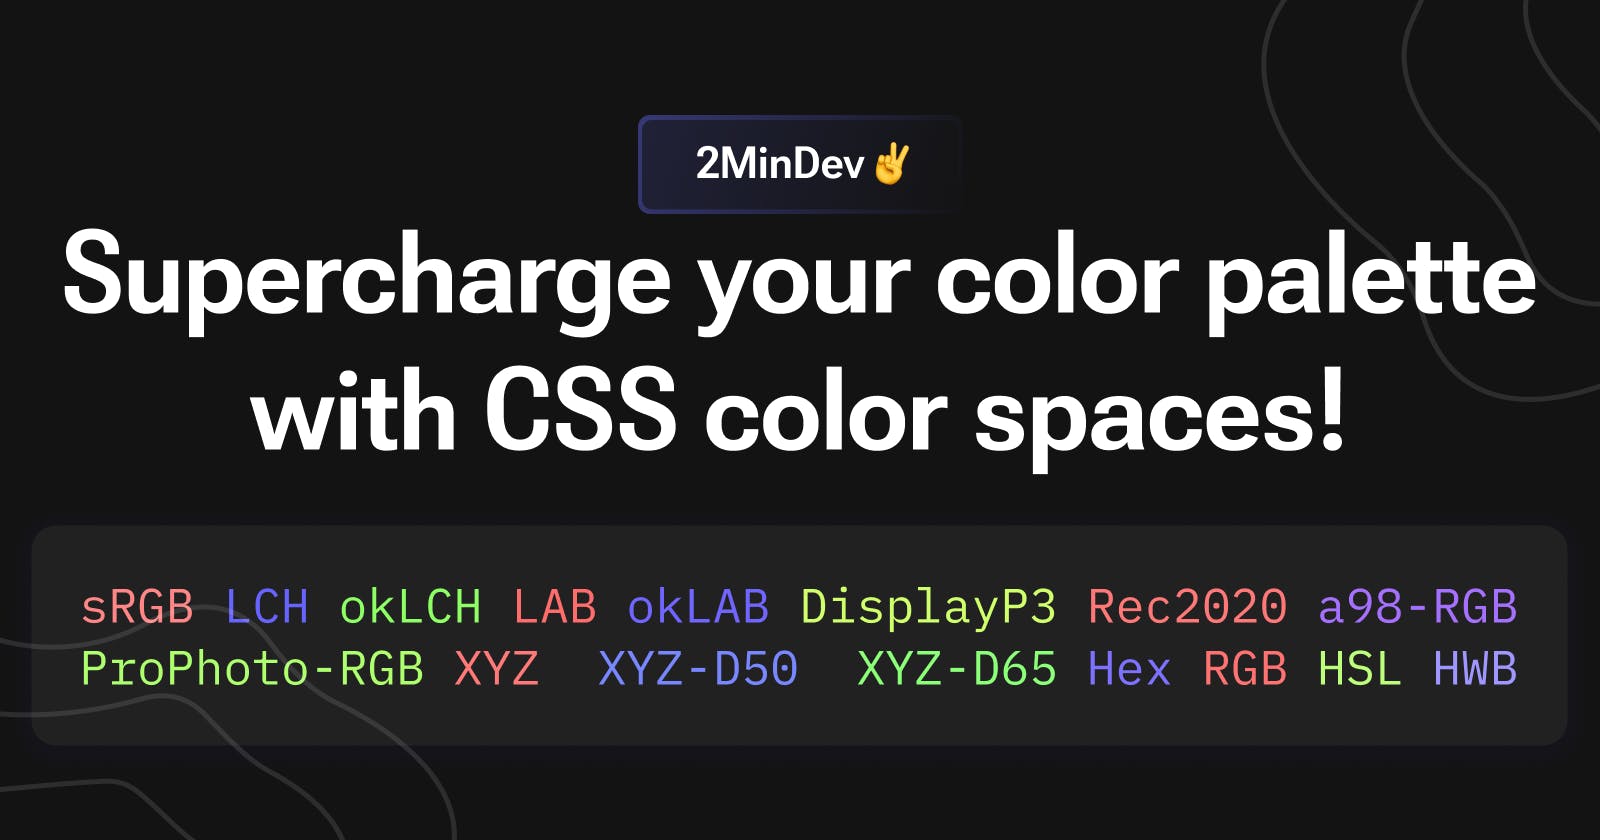 Supercharge your color palette with CSS color spaces!